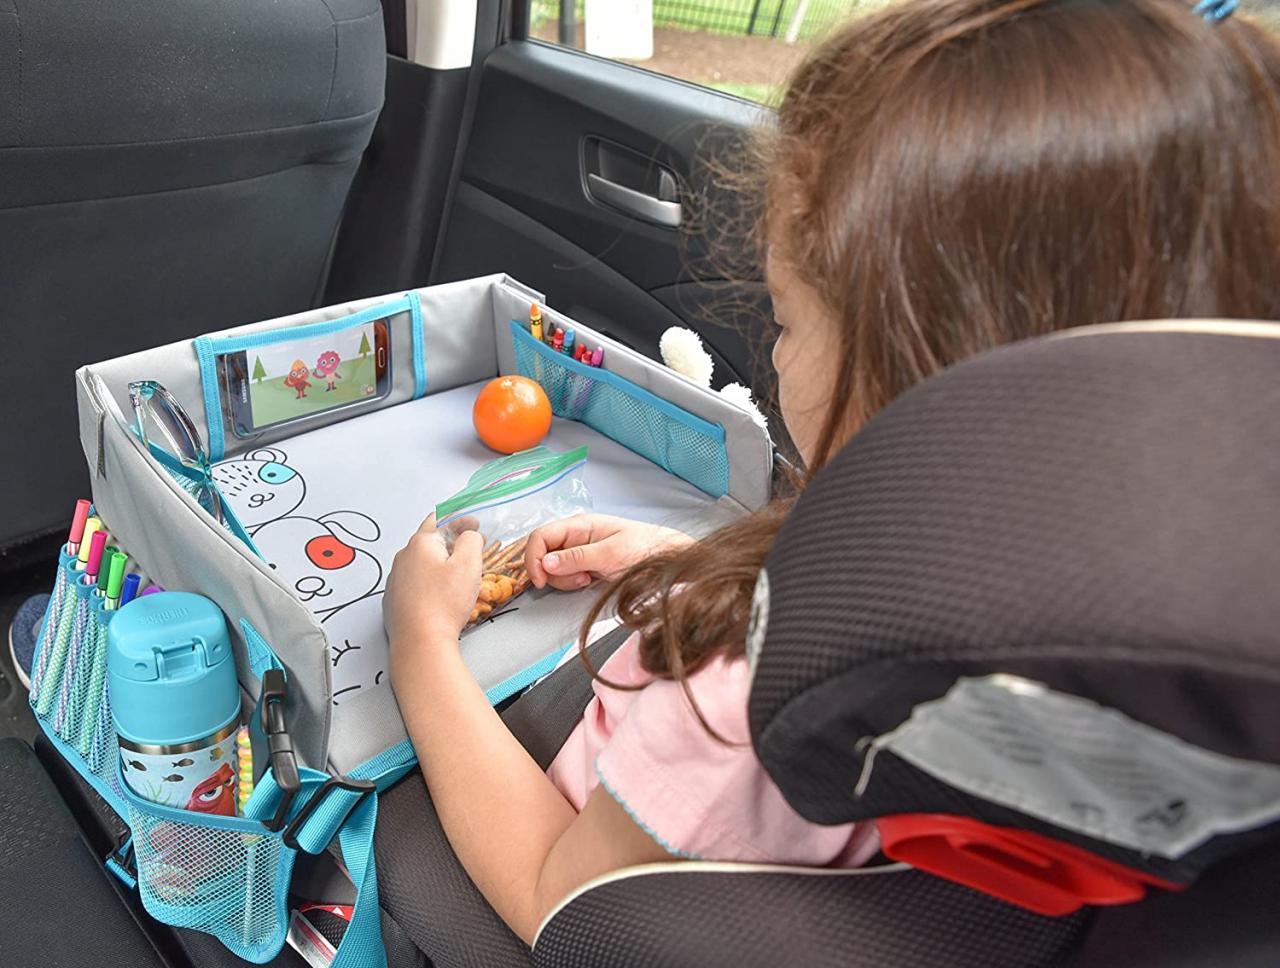 Buy Kids Travel Tray by LillyCrafted-Premium Quality Toddler Car Seat Tray  & Lap Table-with Touchscreen Phone & Tablet Holders-Toddler Activity Play &  Snack Stroller Organizer-Perfect Travel Accessories Online in Hong Kong.  B07BQMN27X